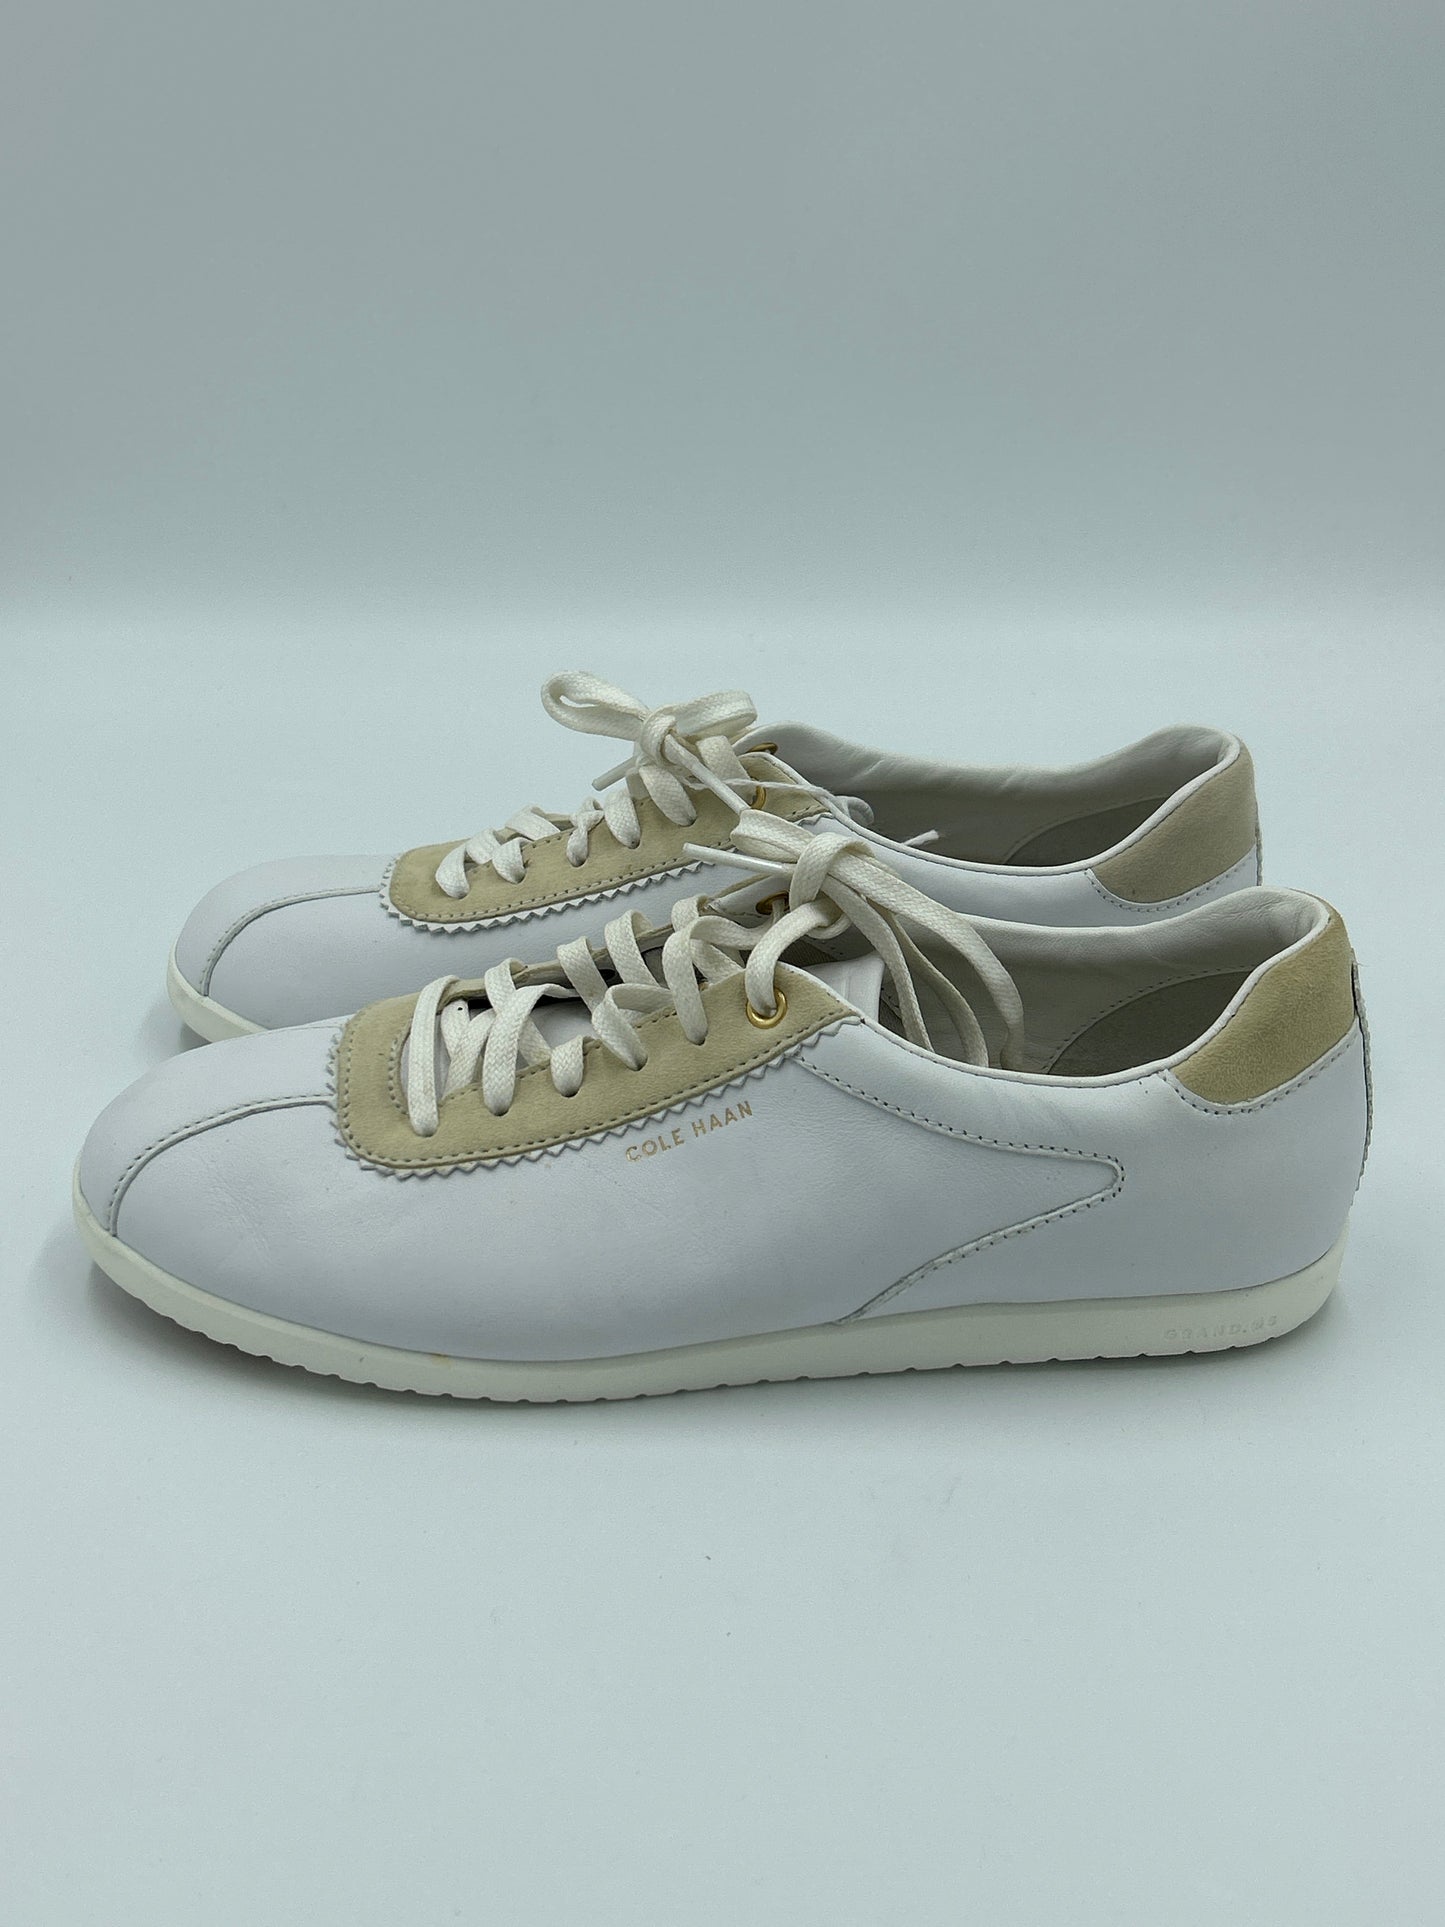 Shoes Designer By Cole-Haan  Size: 9